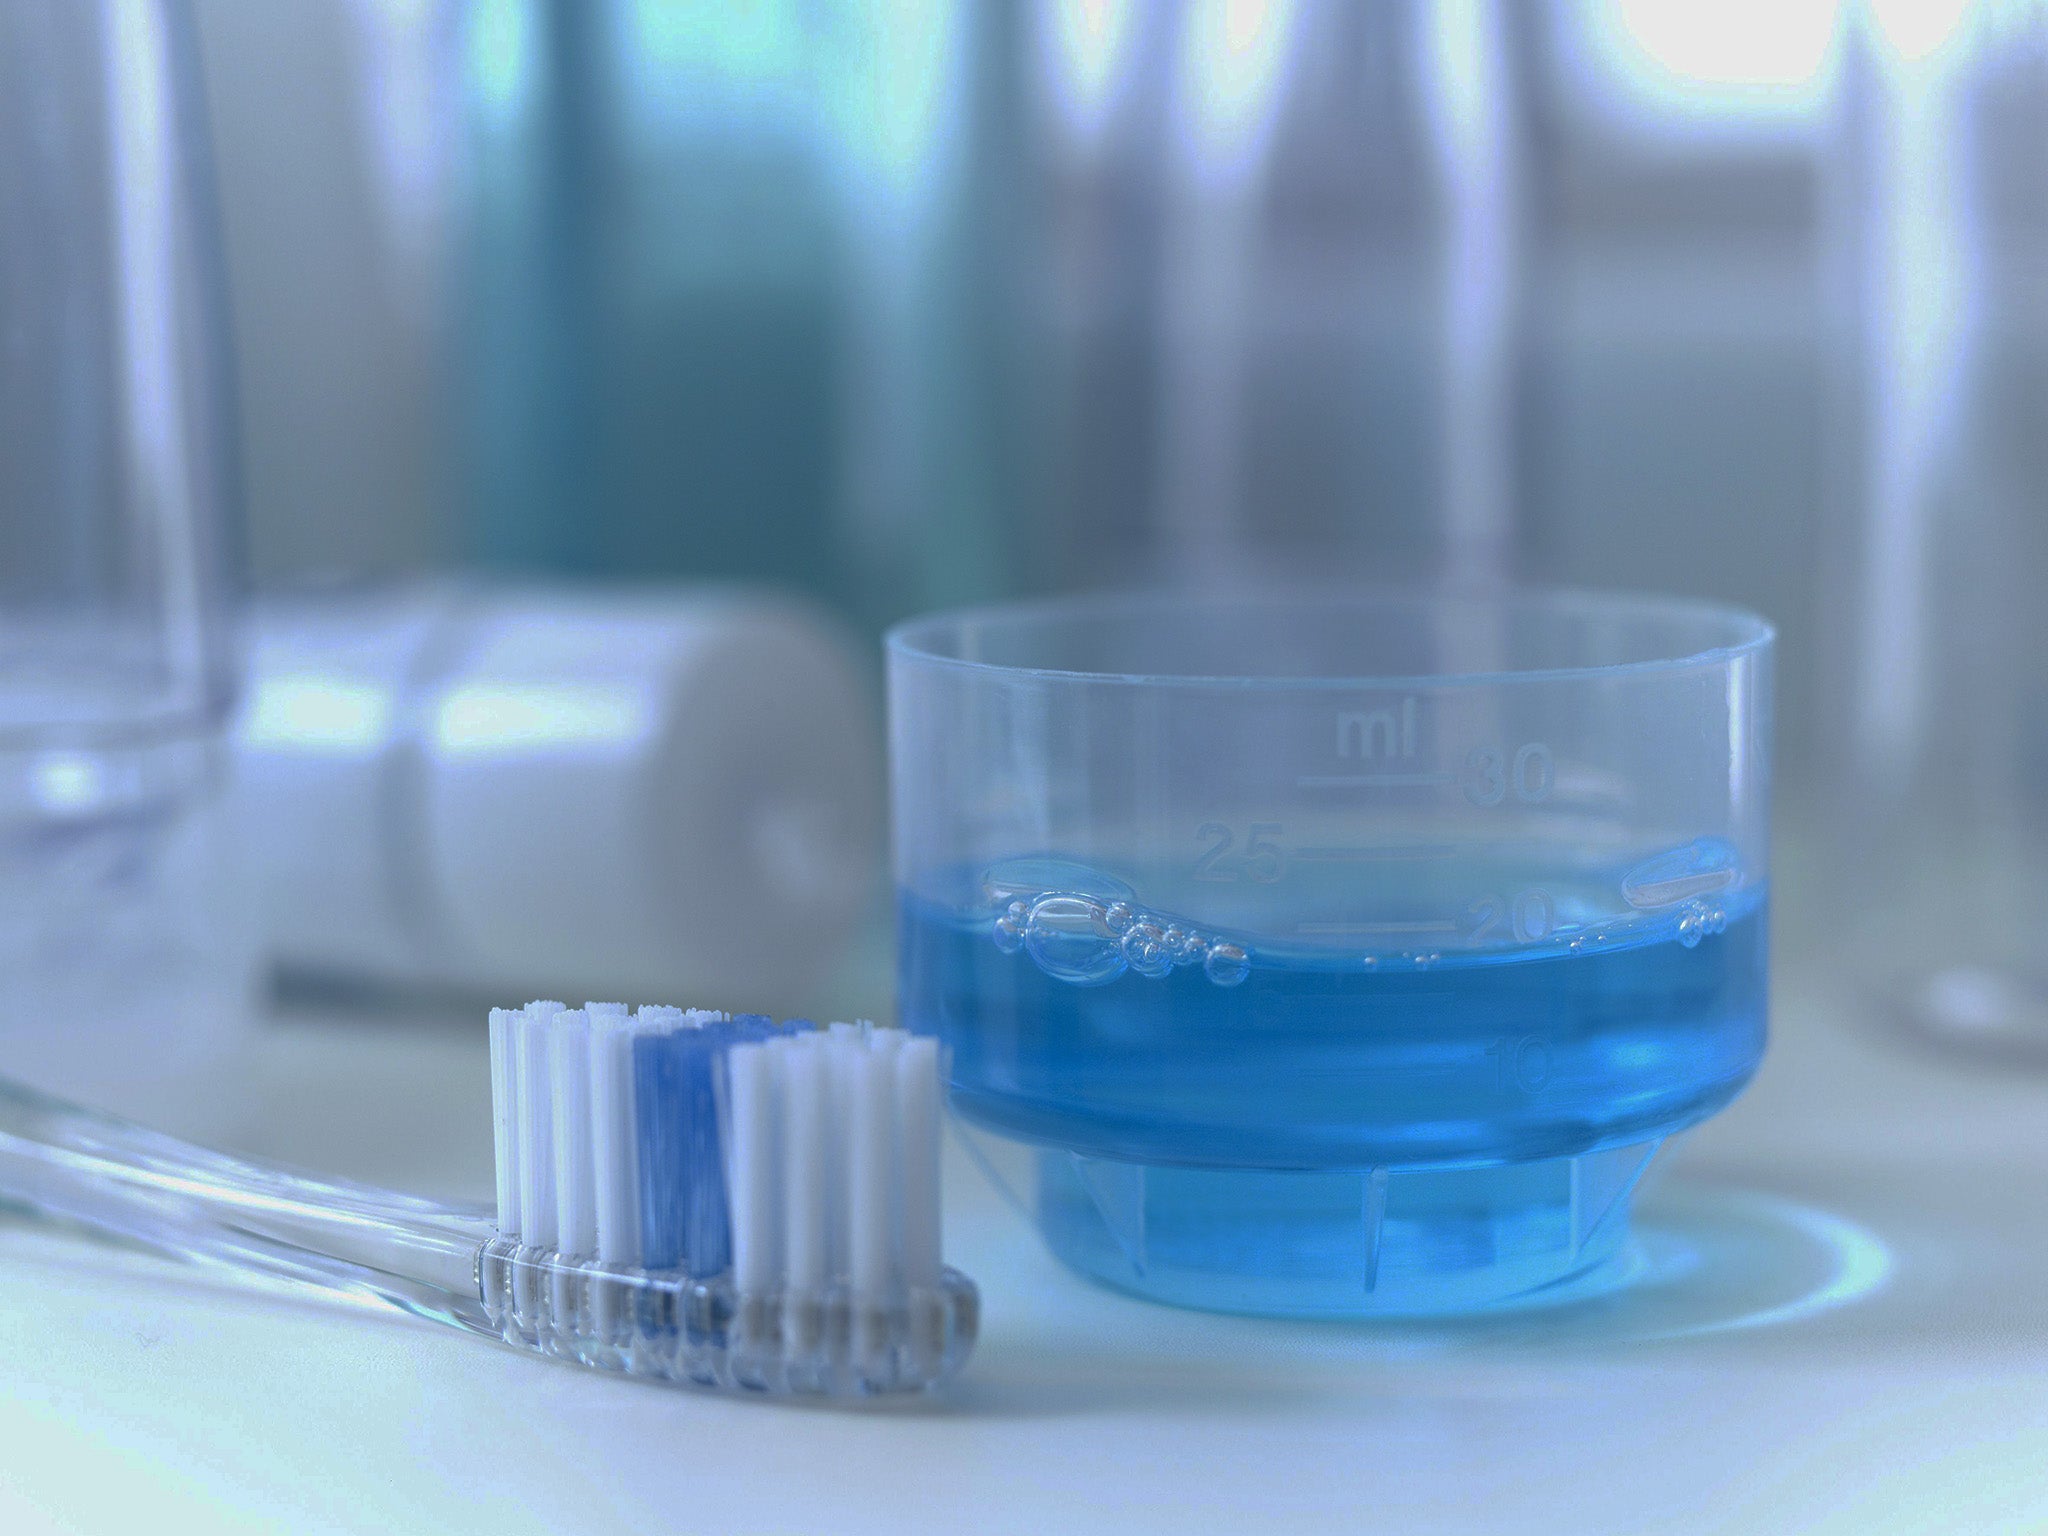 Researchers say there is evidence some mouthwash ingredients can eradicate Covid